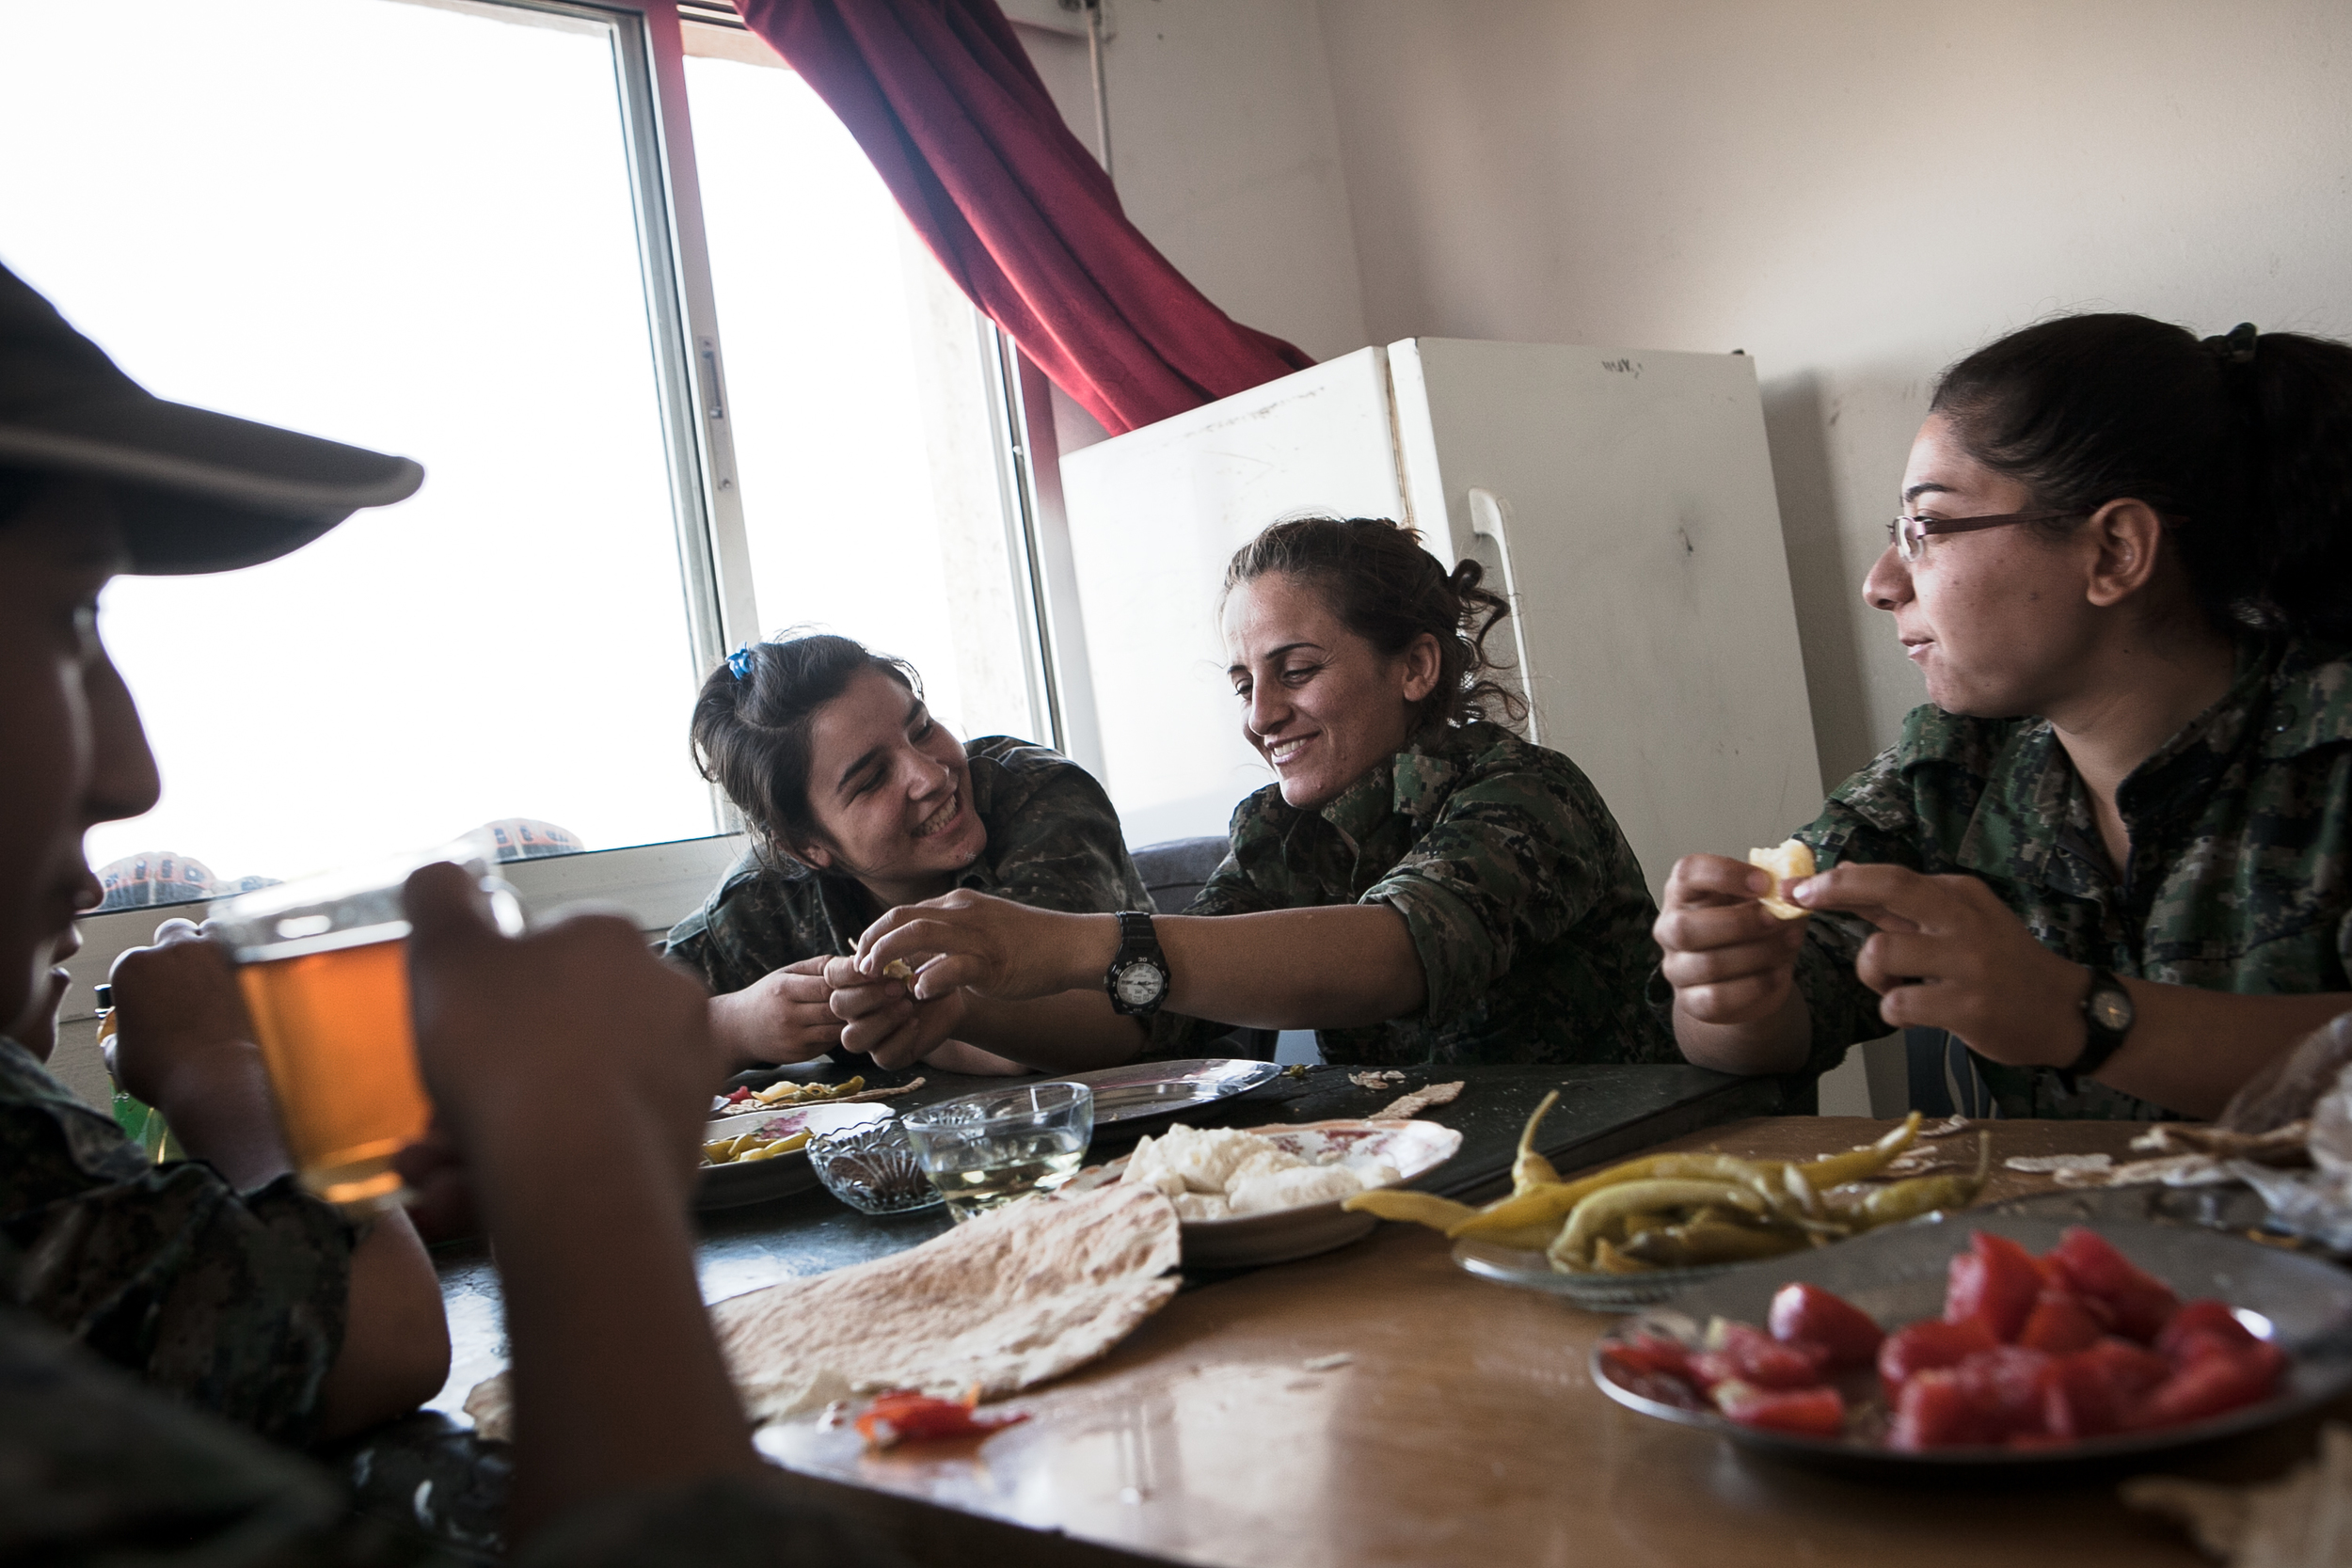  YPJ soldiers have breakfast at their military post near the Syrian-Iraq border in Til Kocer, Syria. YPJ meals are modest since most of their supplies and food are donated from local community members. 